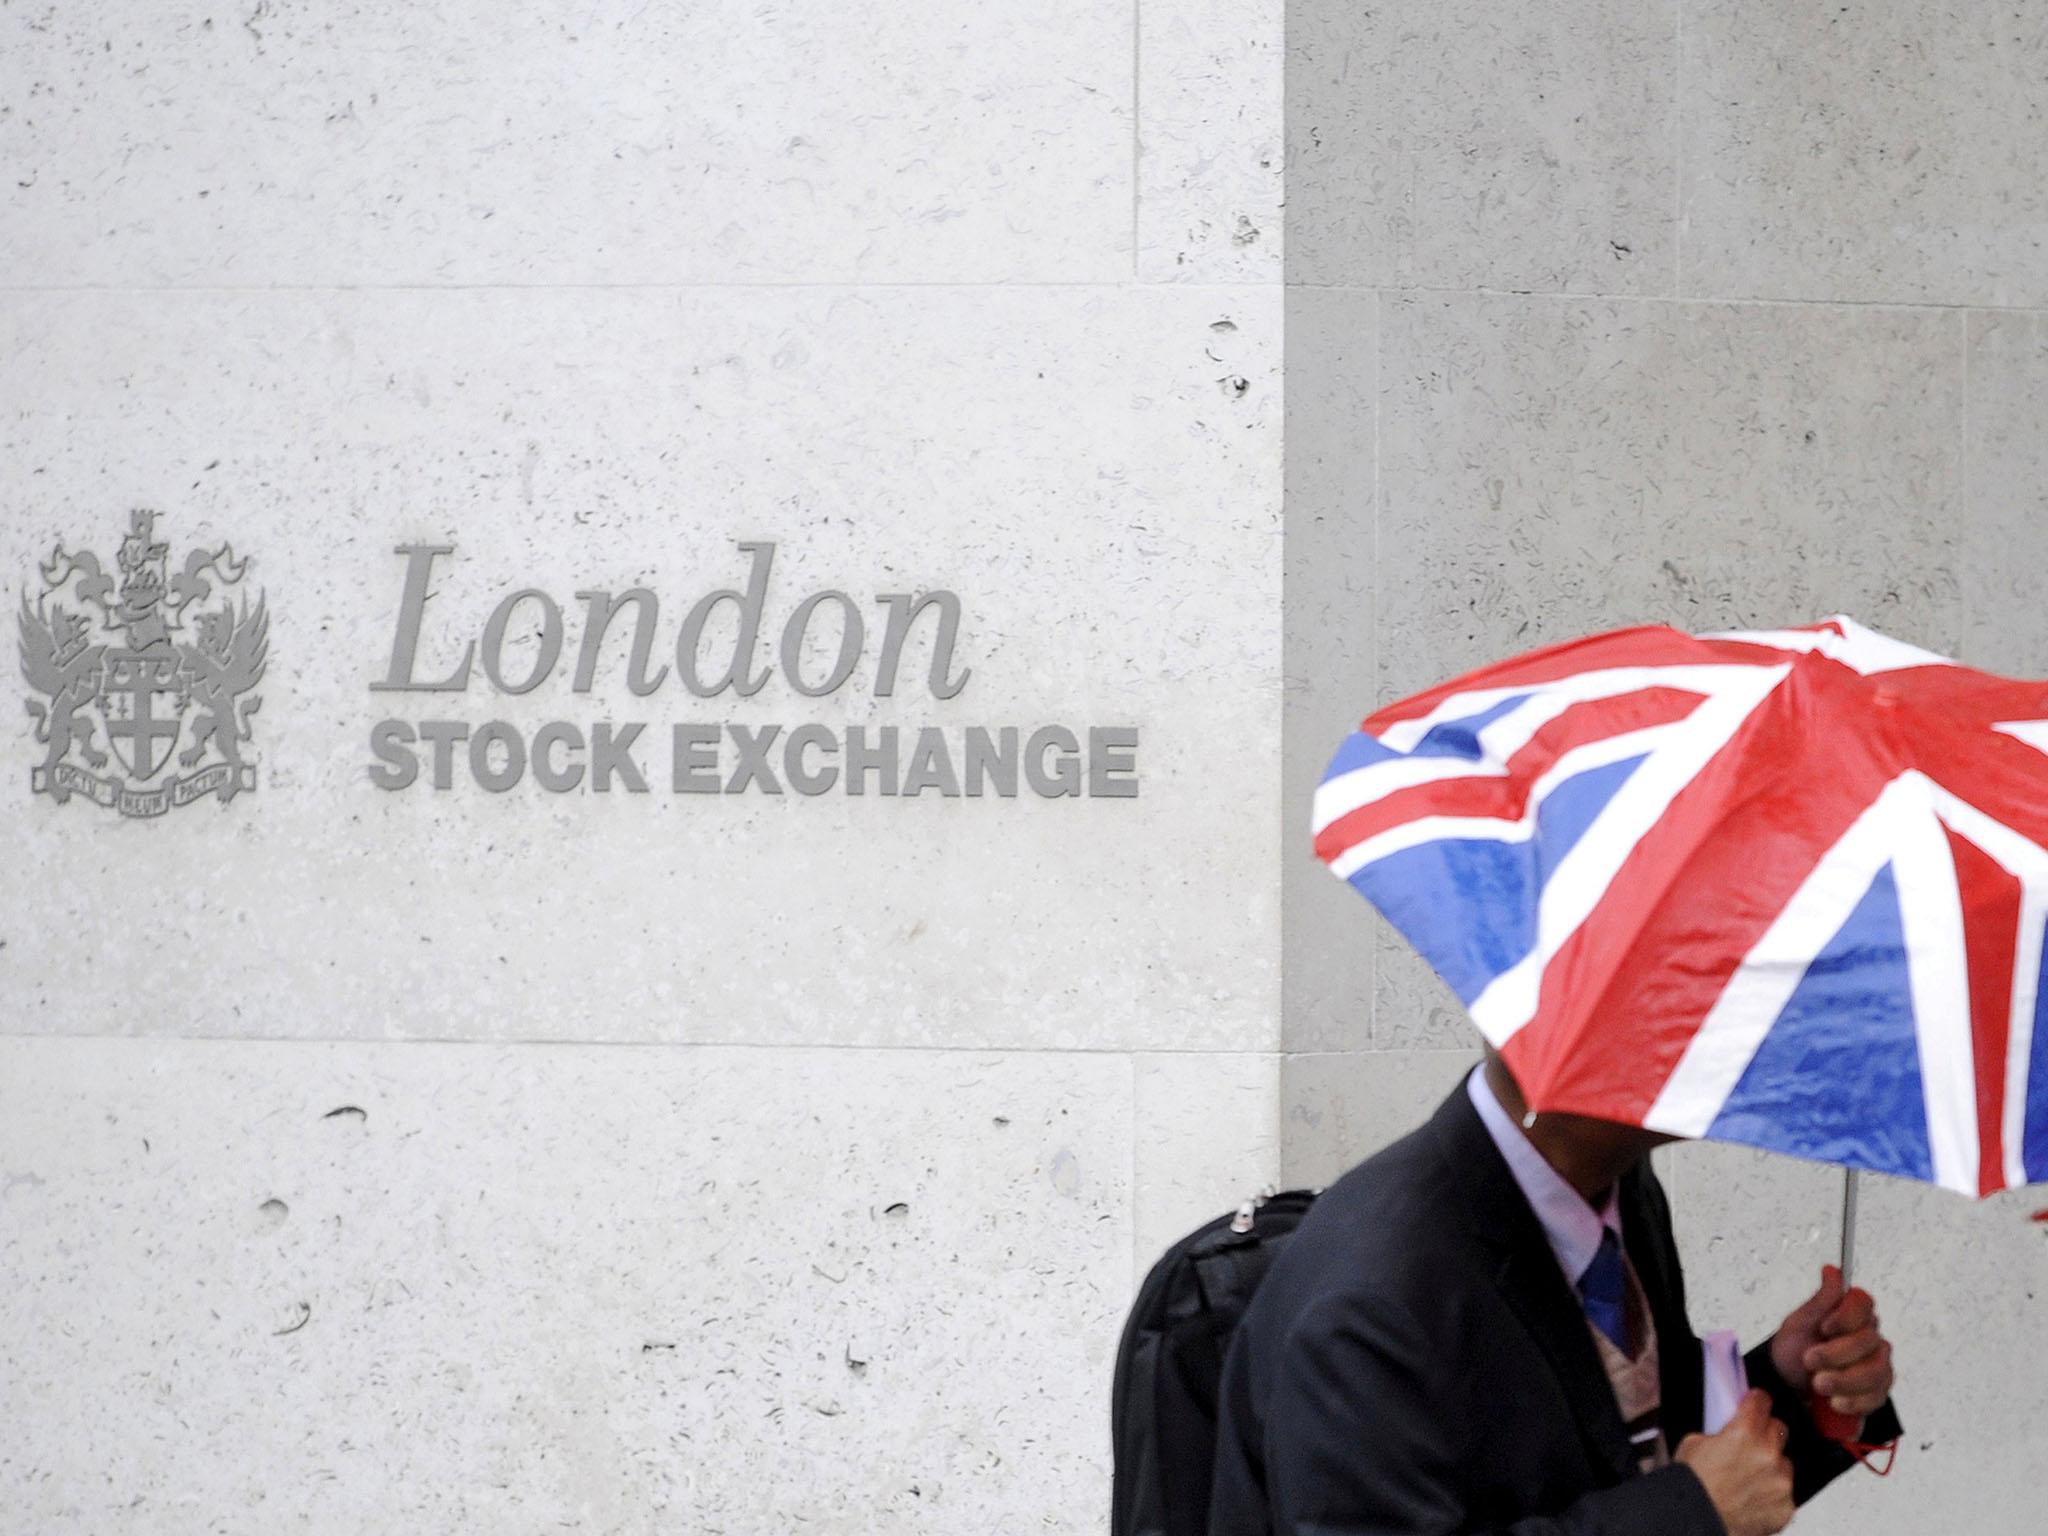 London Stock Exchange said it was following 'proper' procedures to find a new CEO